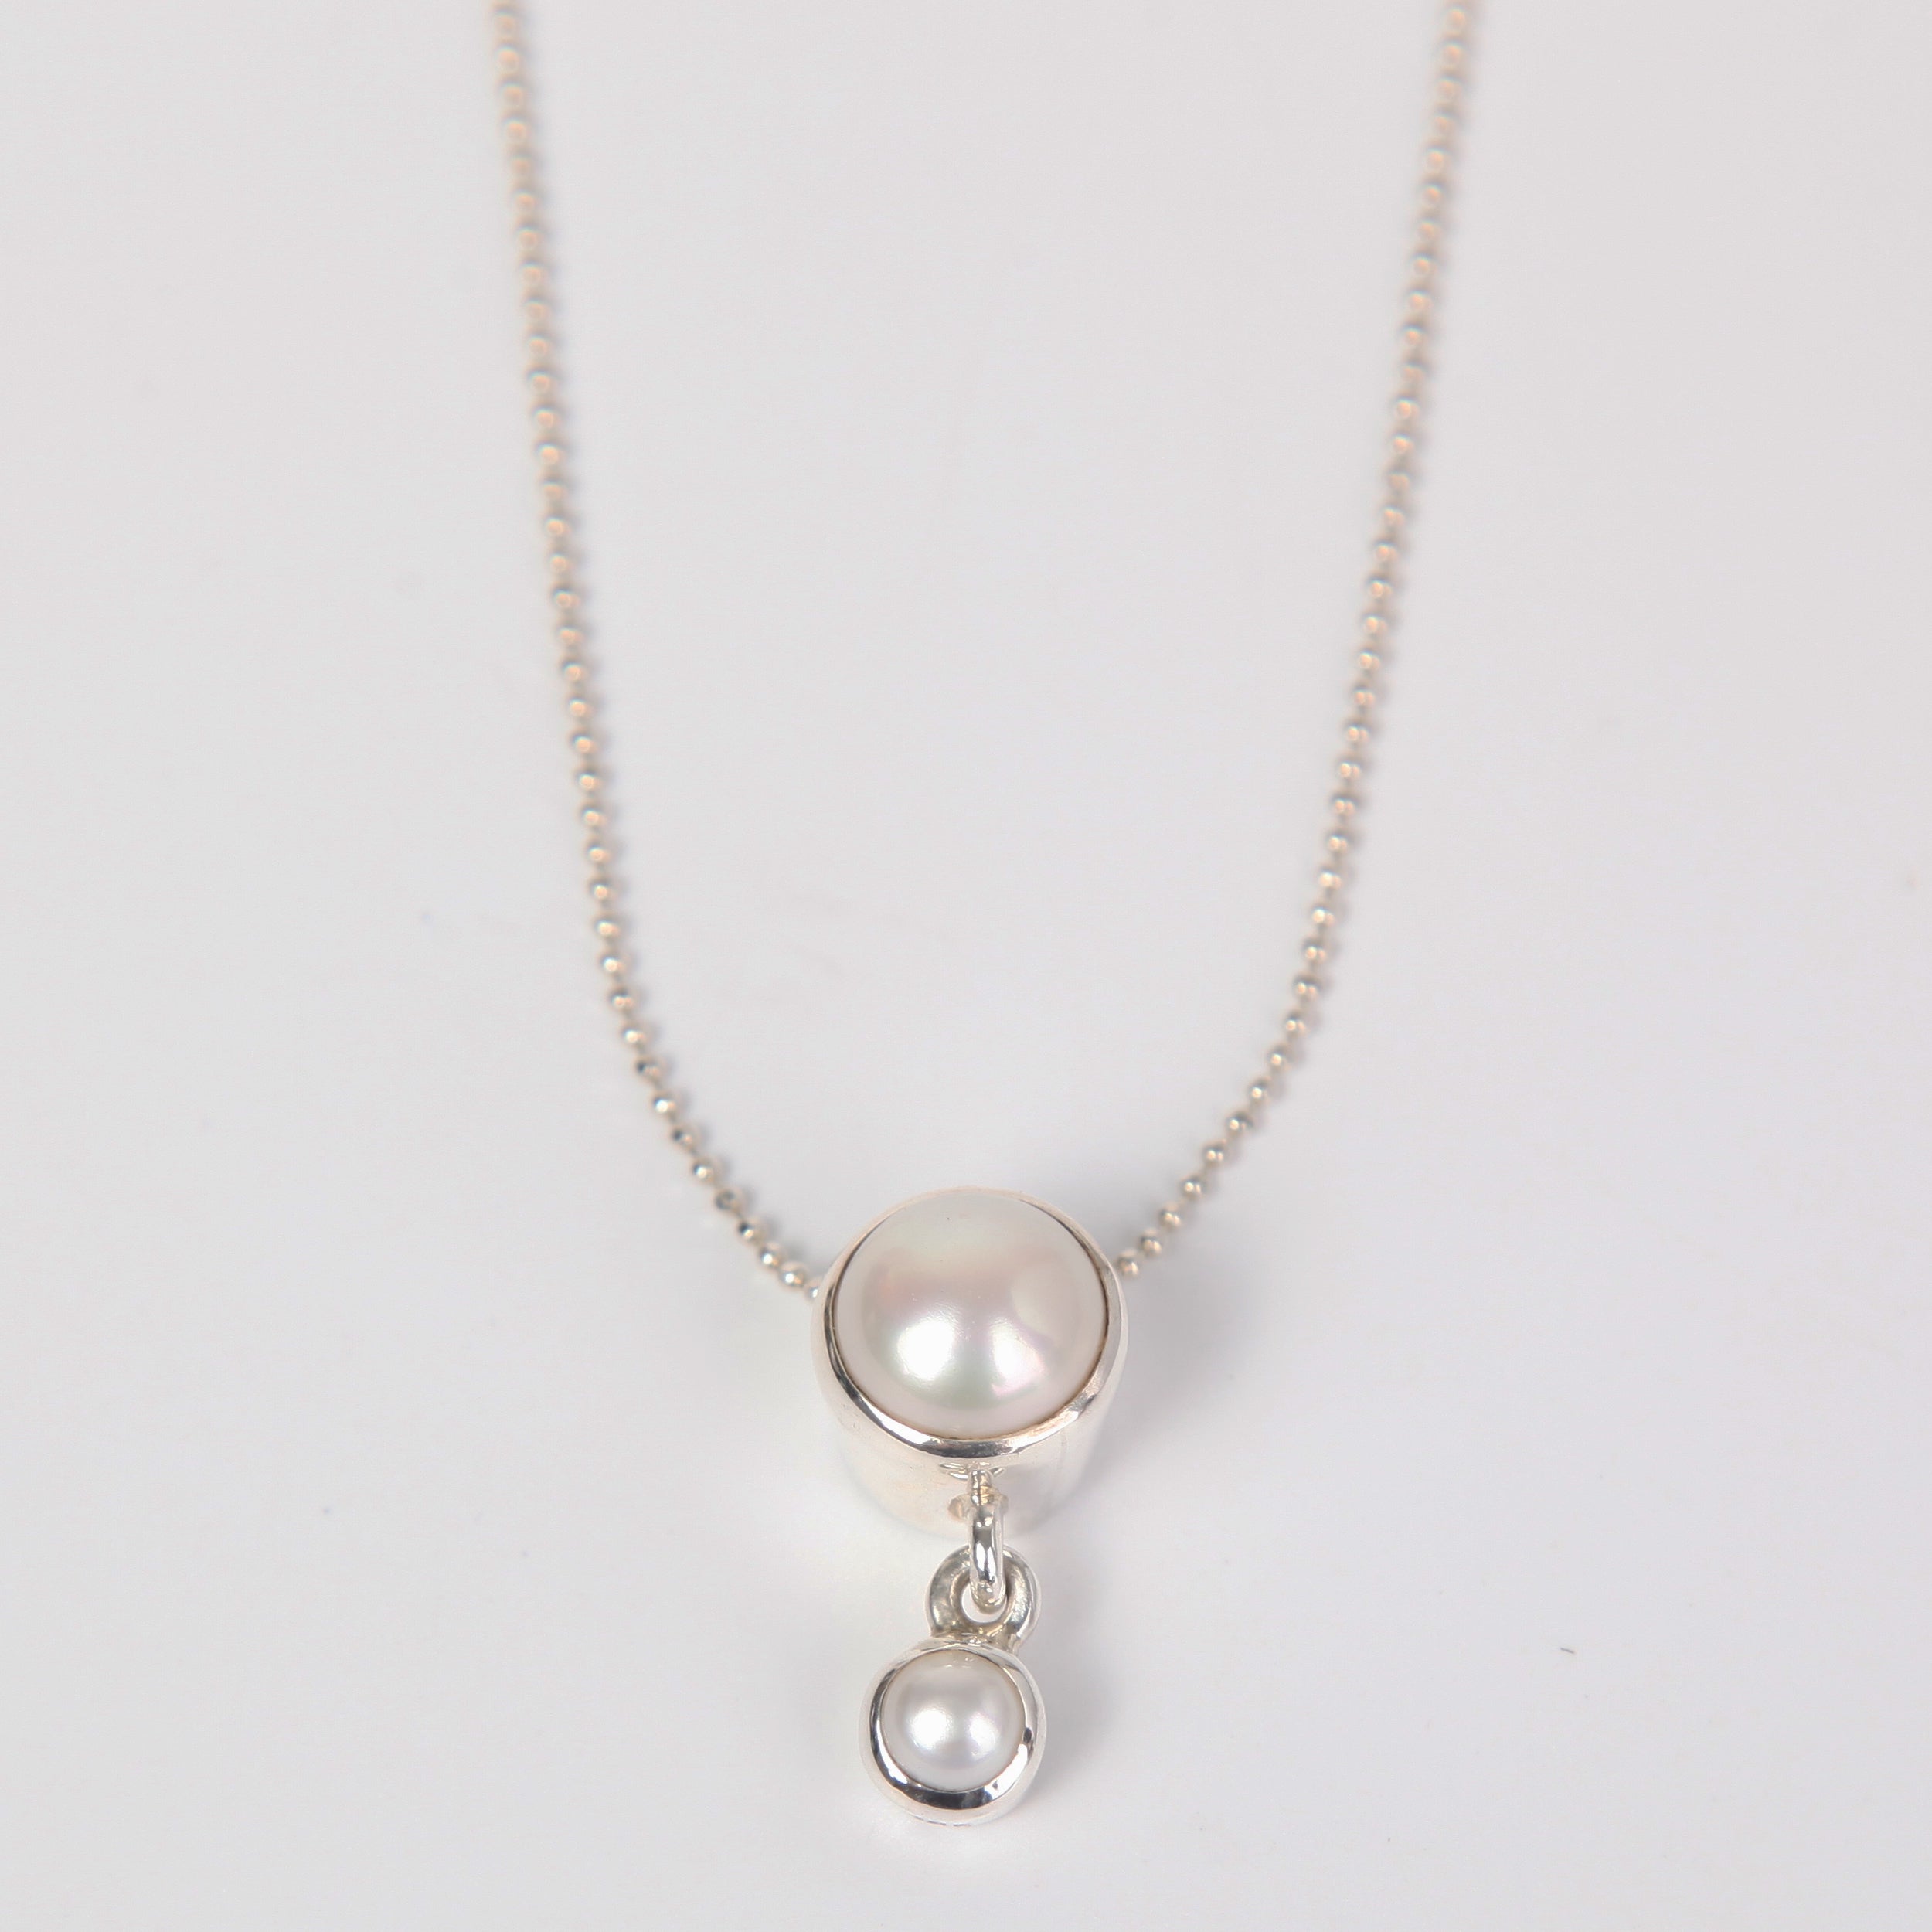 Sterling Silver Necklace with Double Fresh Water Pearls